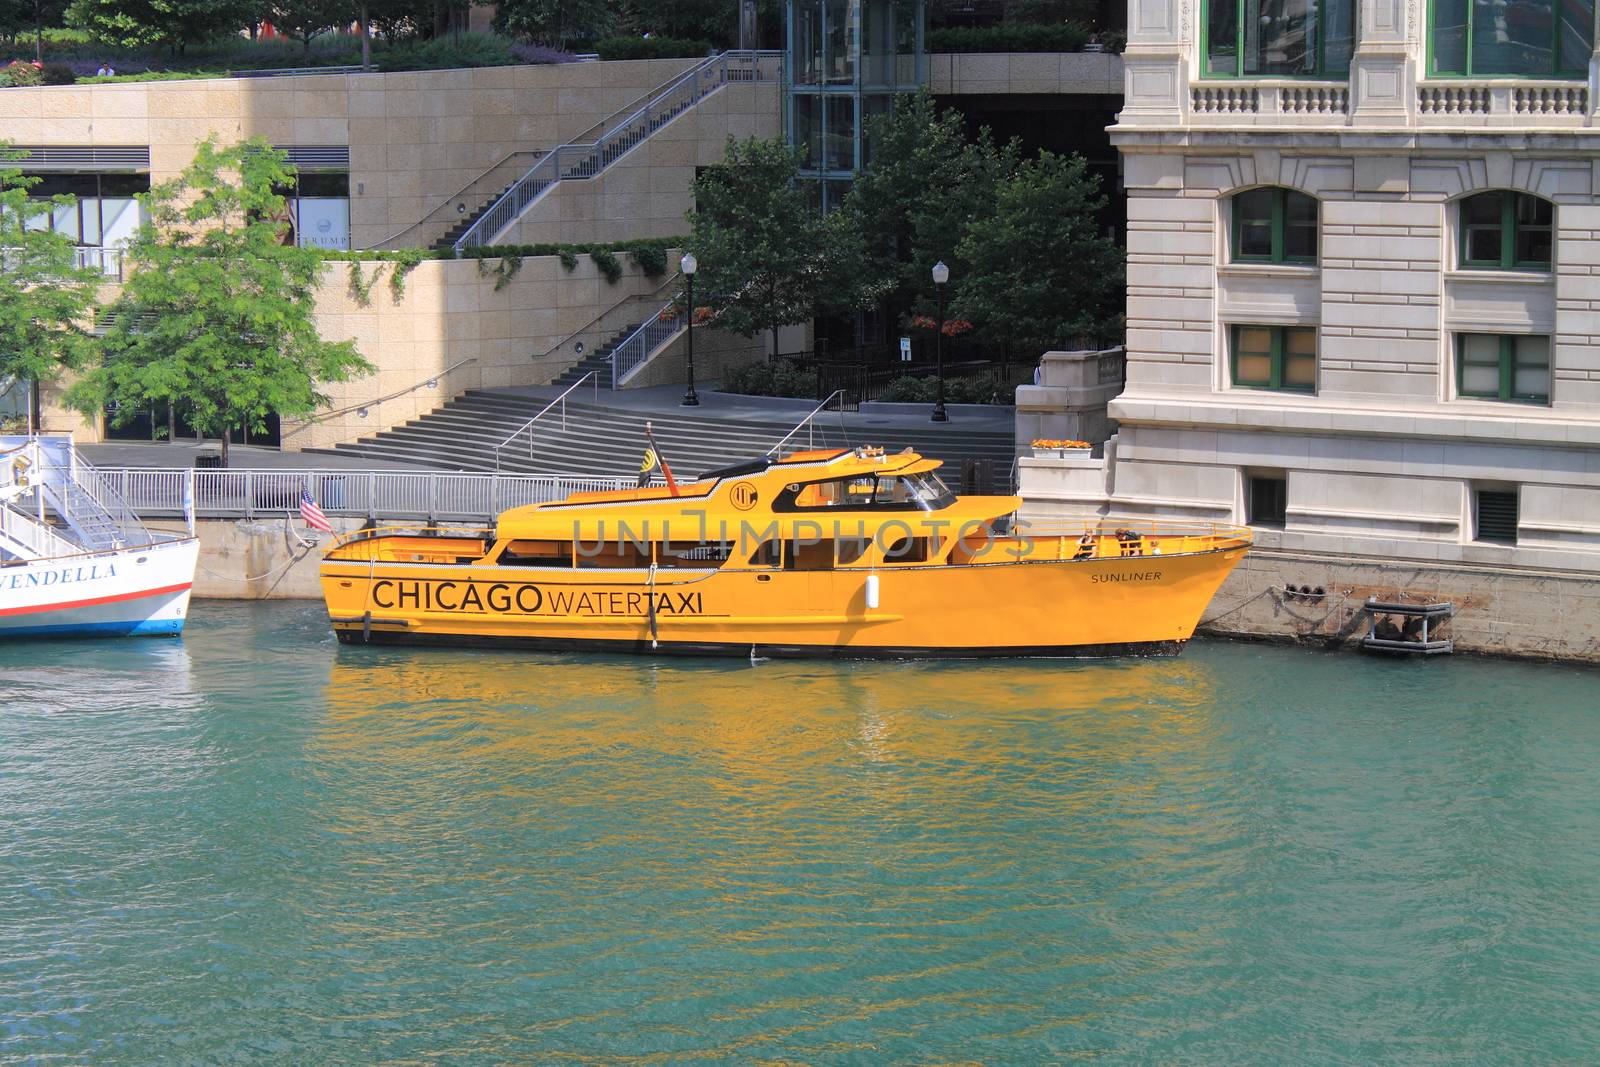 Chicago Water Taxi by Ffooter